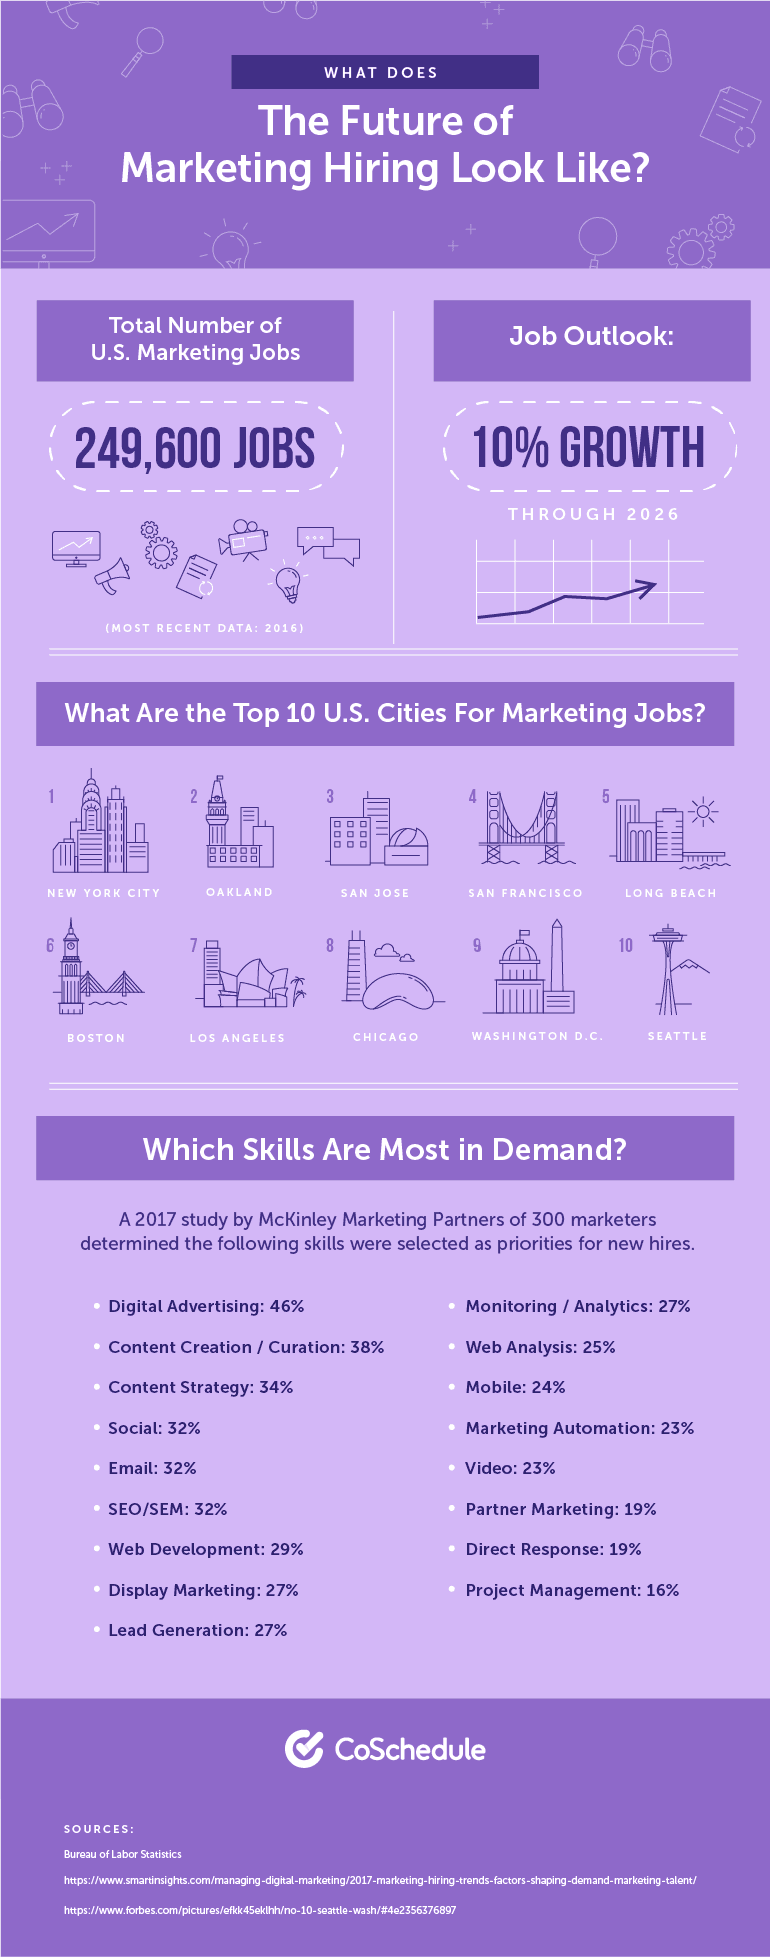 What Does the Future of Marketing Hiring Look Like?